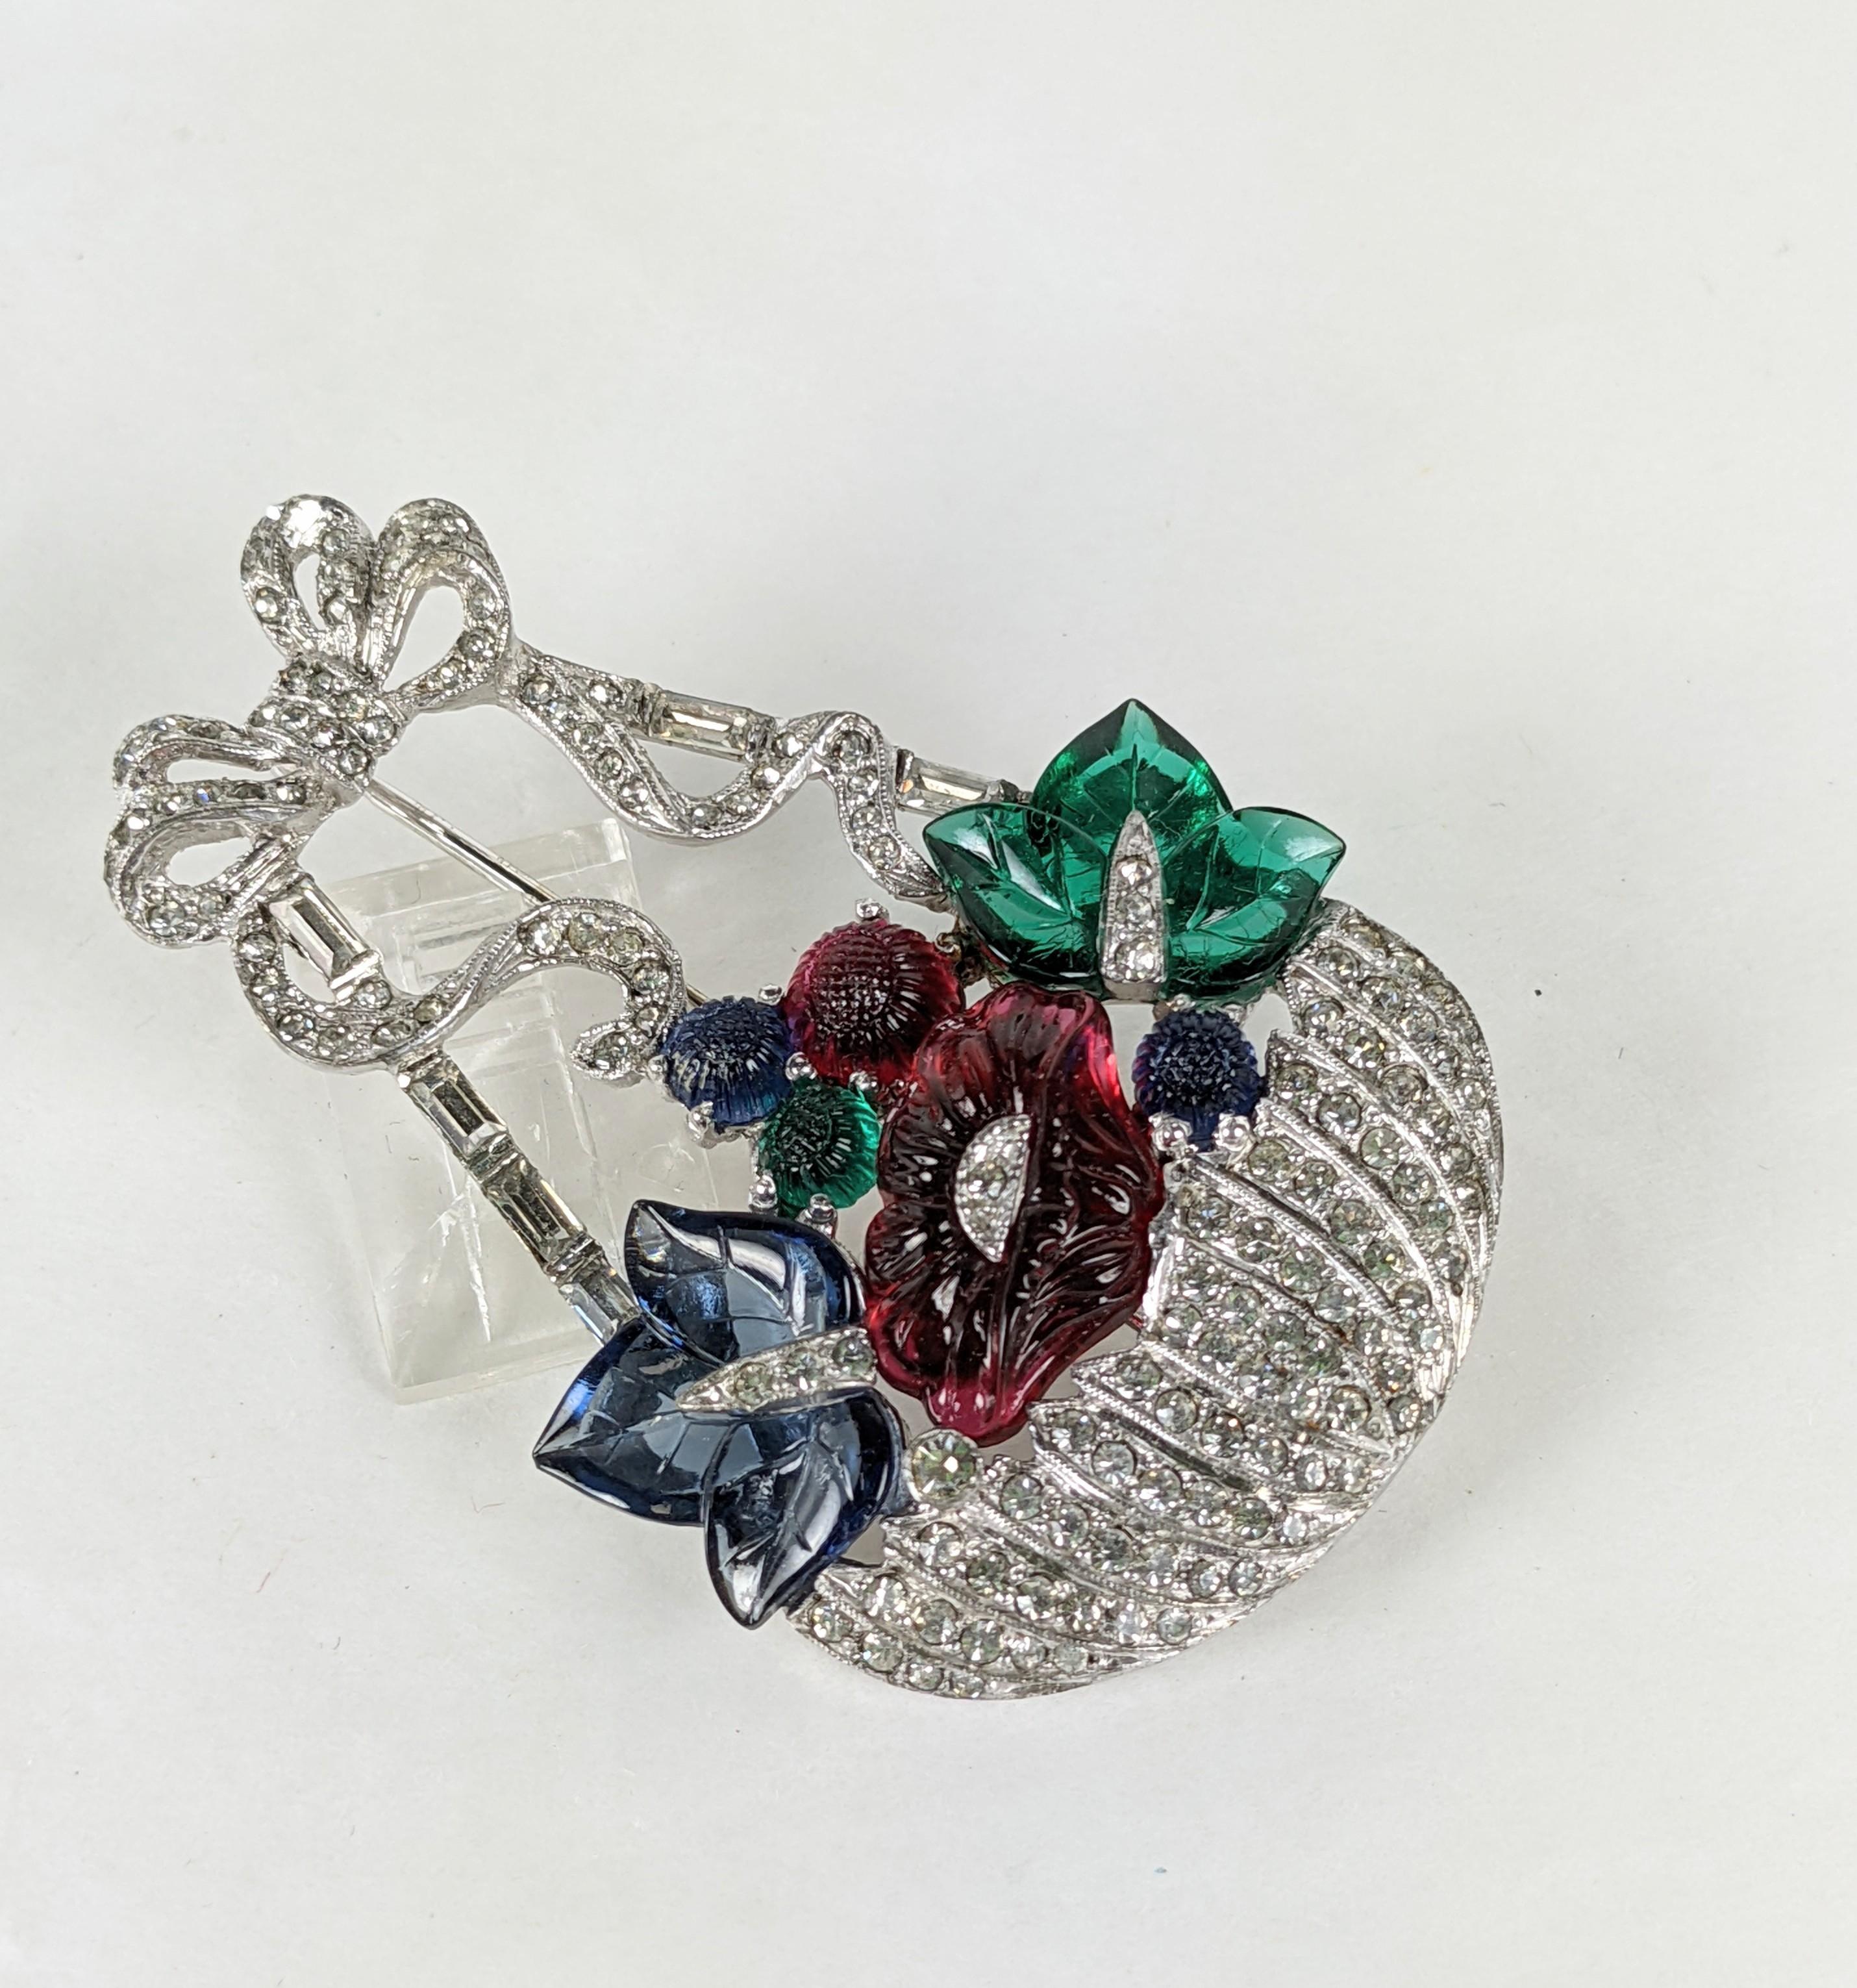 Mazer rare Art Deco brooch of pave and tricolor fruit salad stones. The openwork flower baskets' handle wrapped by an unfurling bow. The brooch of rhodium plate base metal, crystal rhinestone pave, molded fruit salad flowers, round buds, and pointed